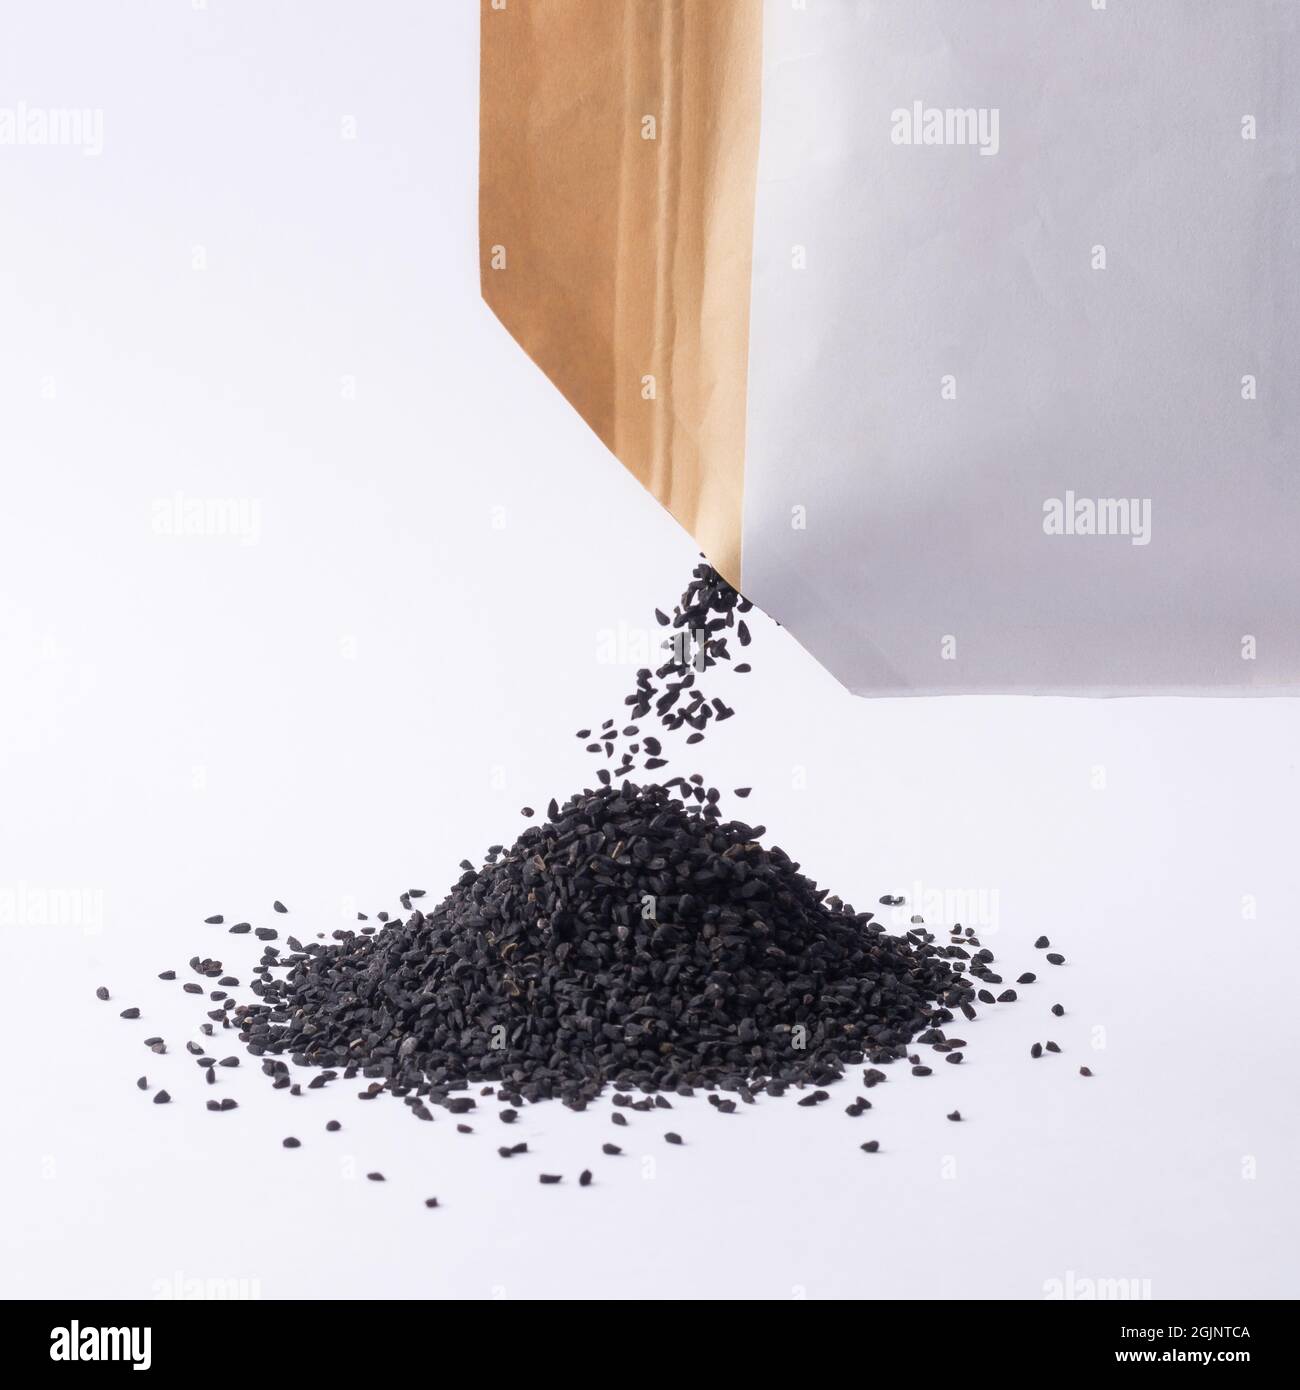 heap of black seeds, also known as black cumin or caraway or kalonji, poured out from a packet, mockup template, isolated on neutral background, close Stock Photo